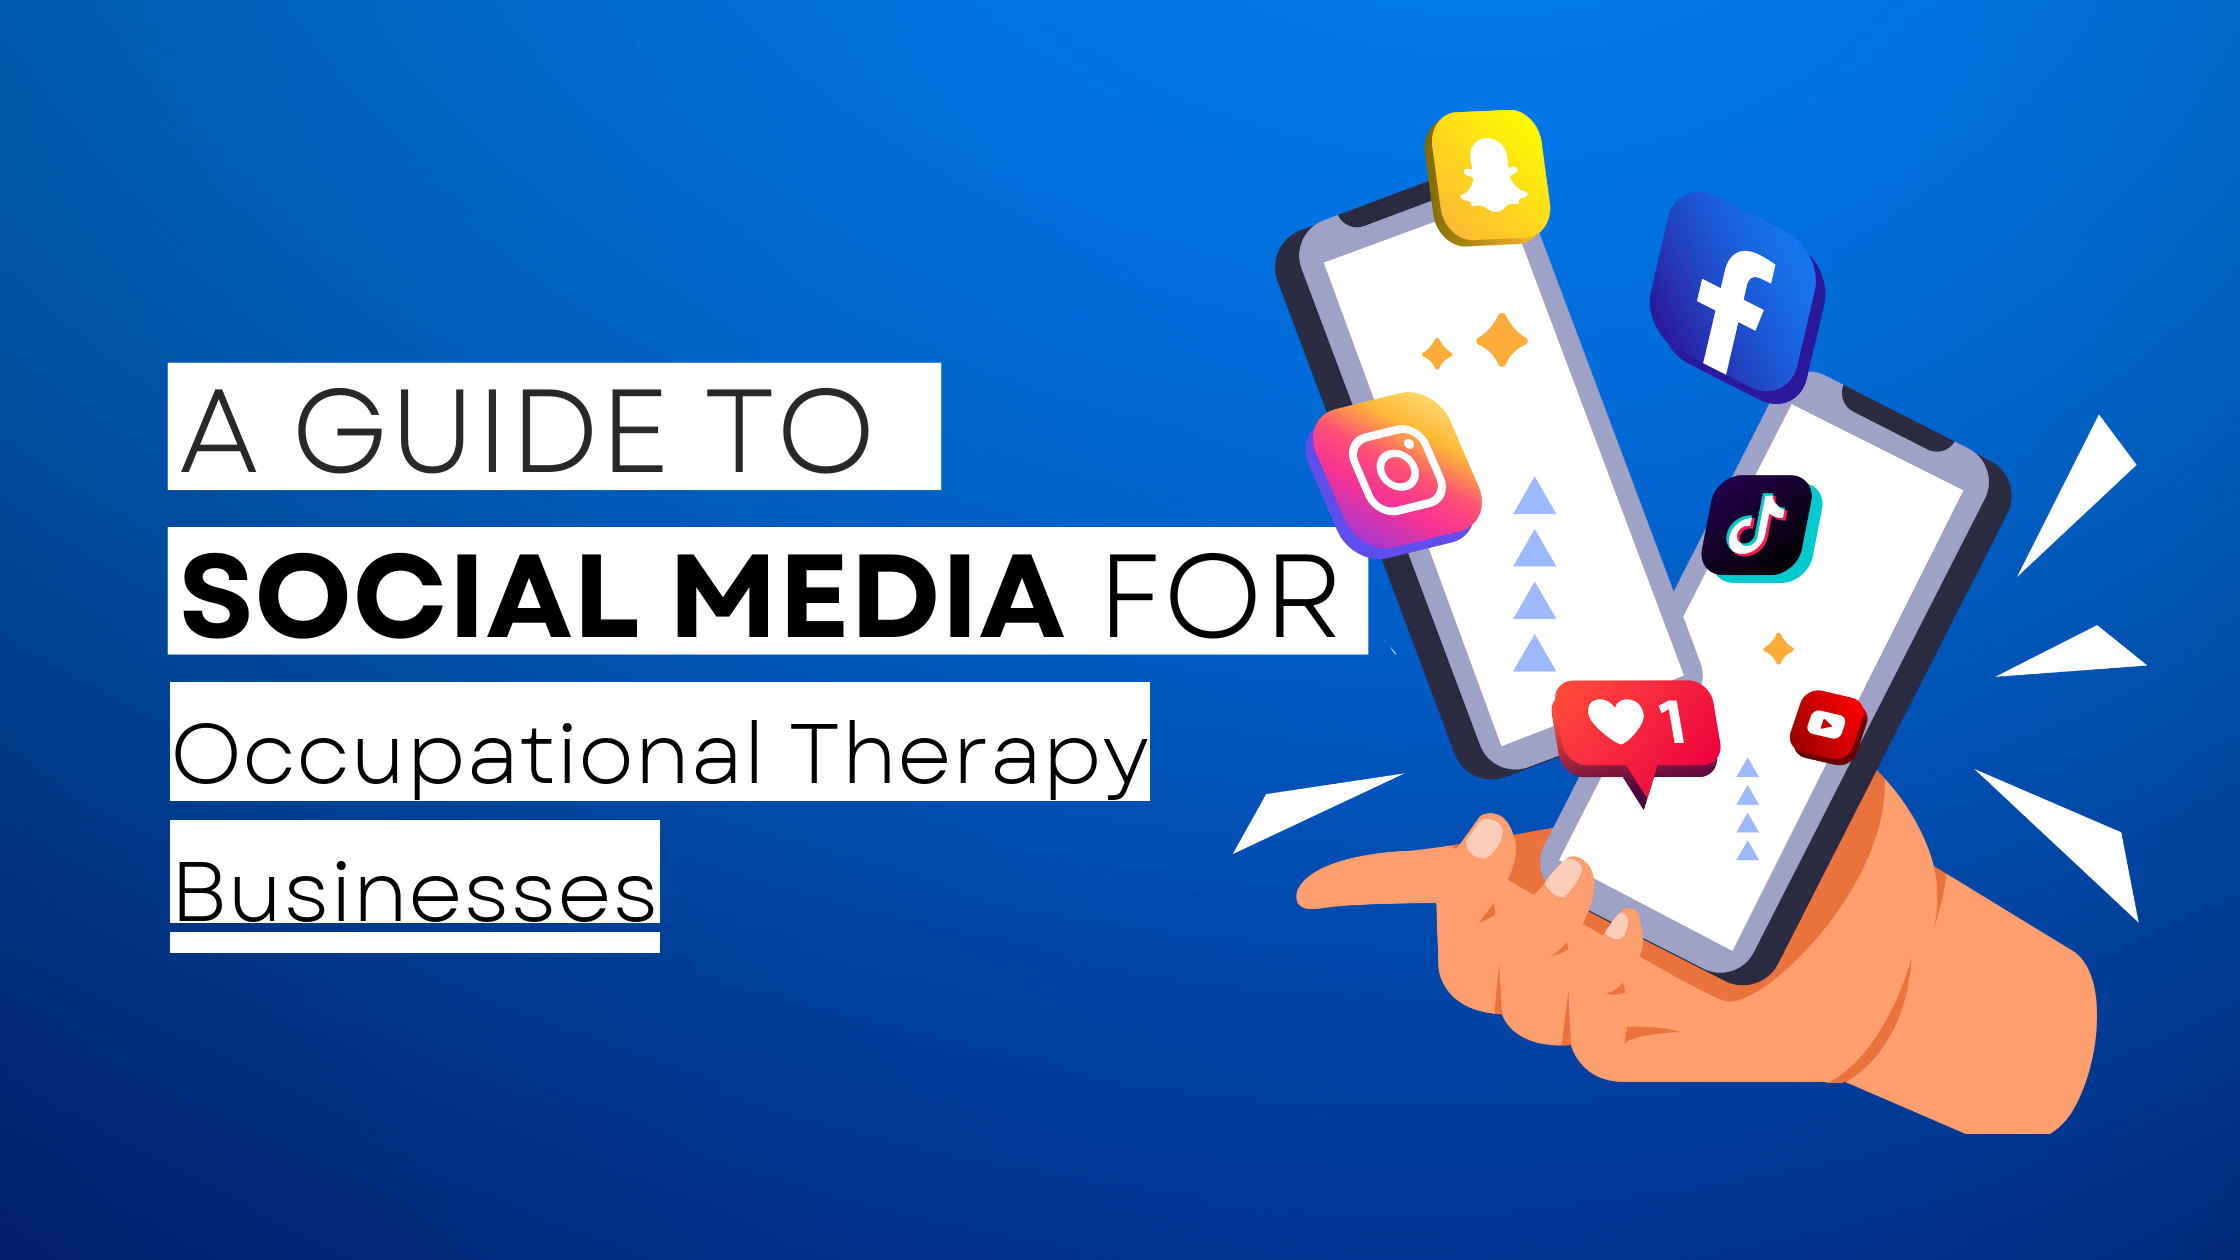 How to start Occupational Therapy on social media